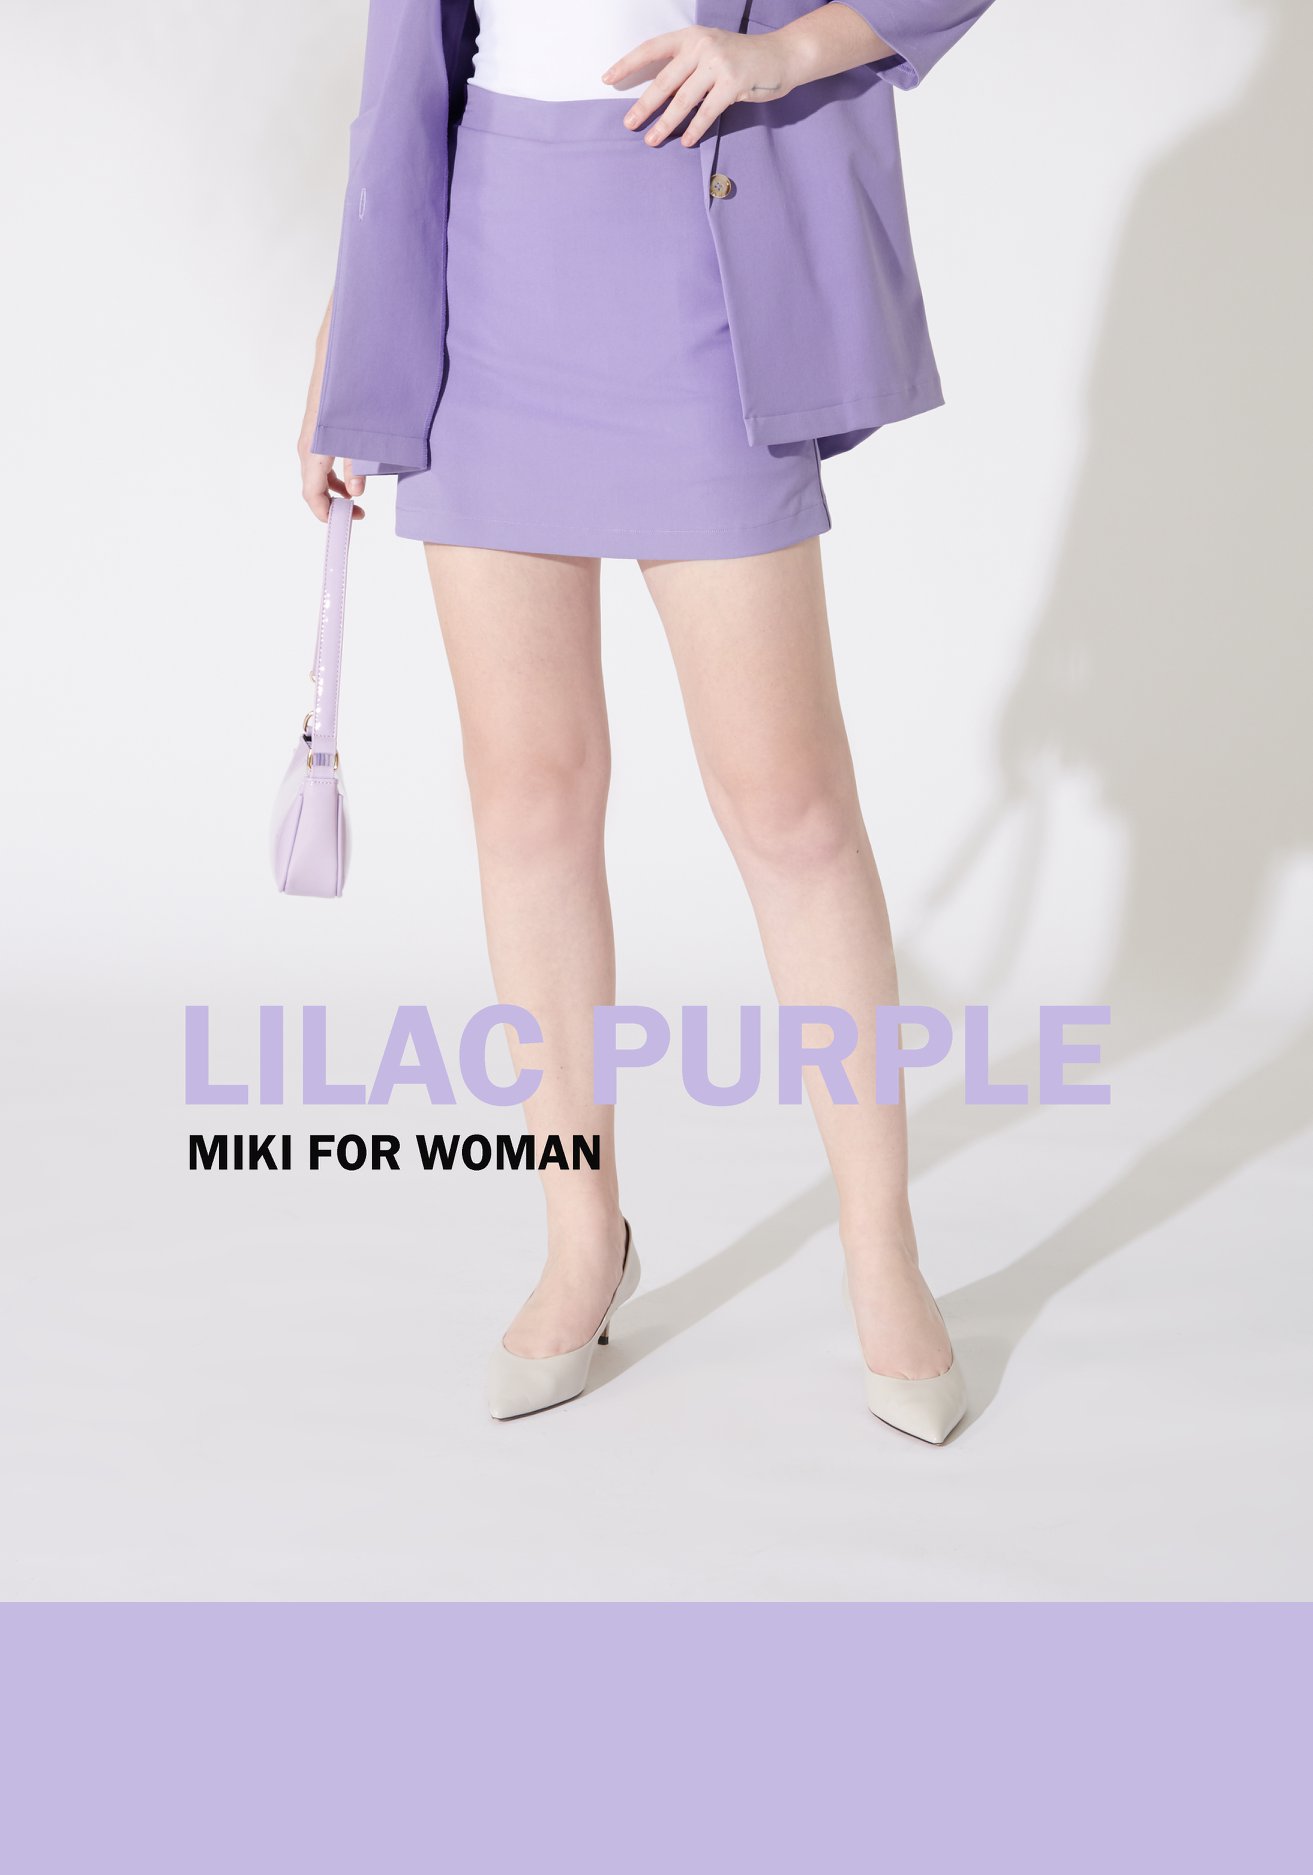 MIKI FOR WOMAN – LILAC PURPLE